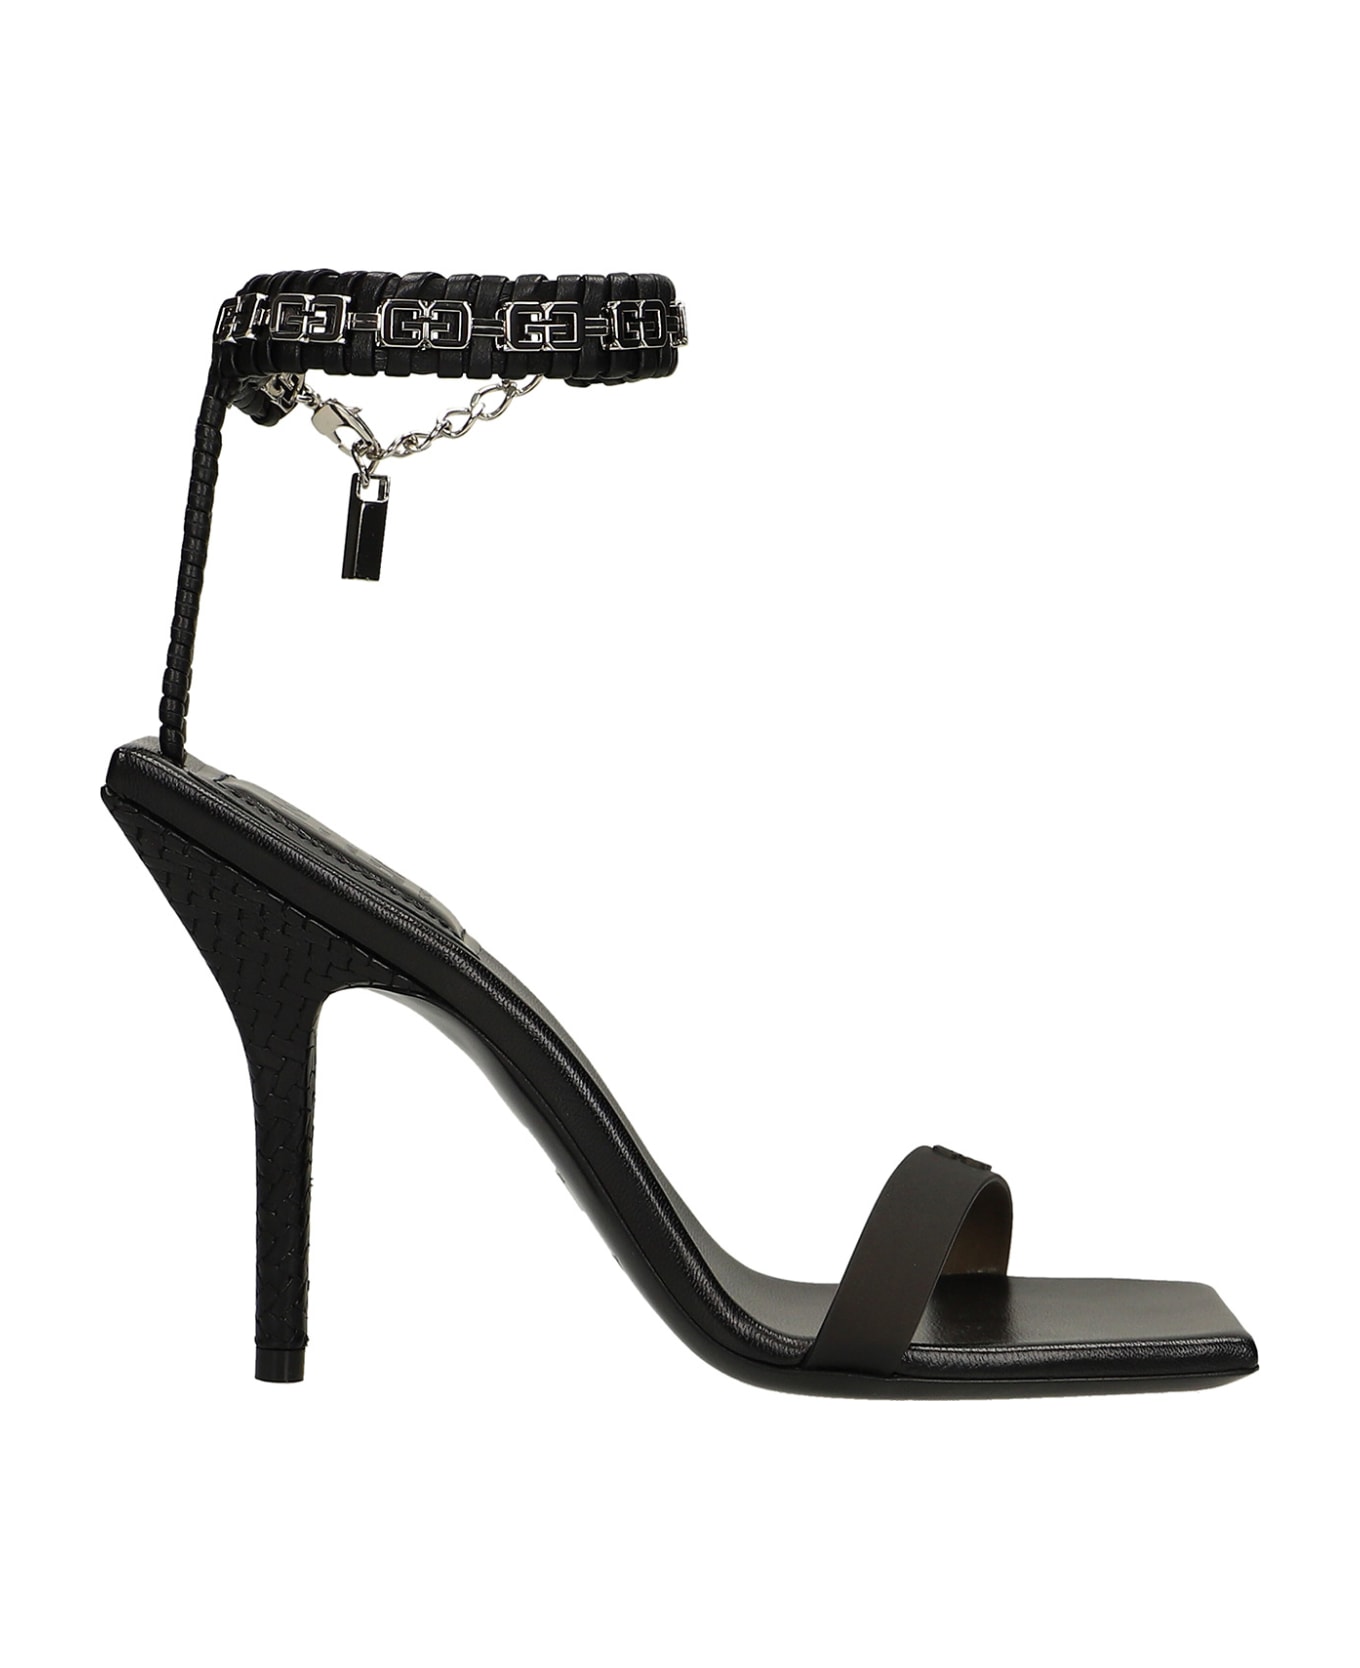 Givenchy Sandals In Black Leather - black